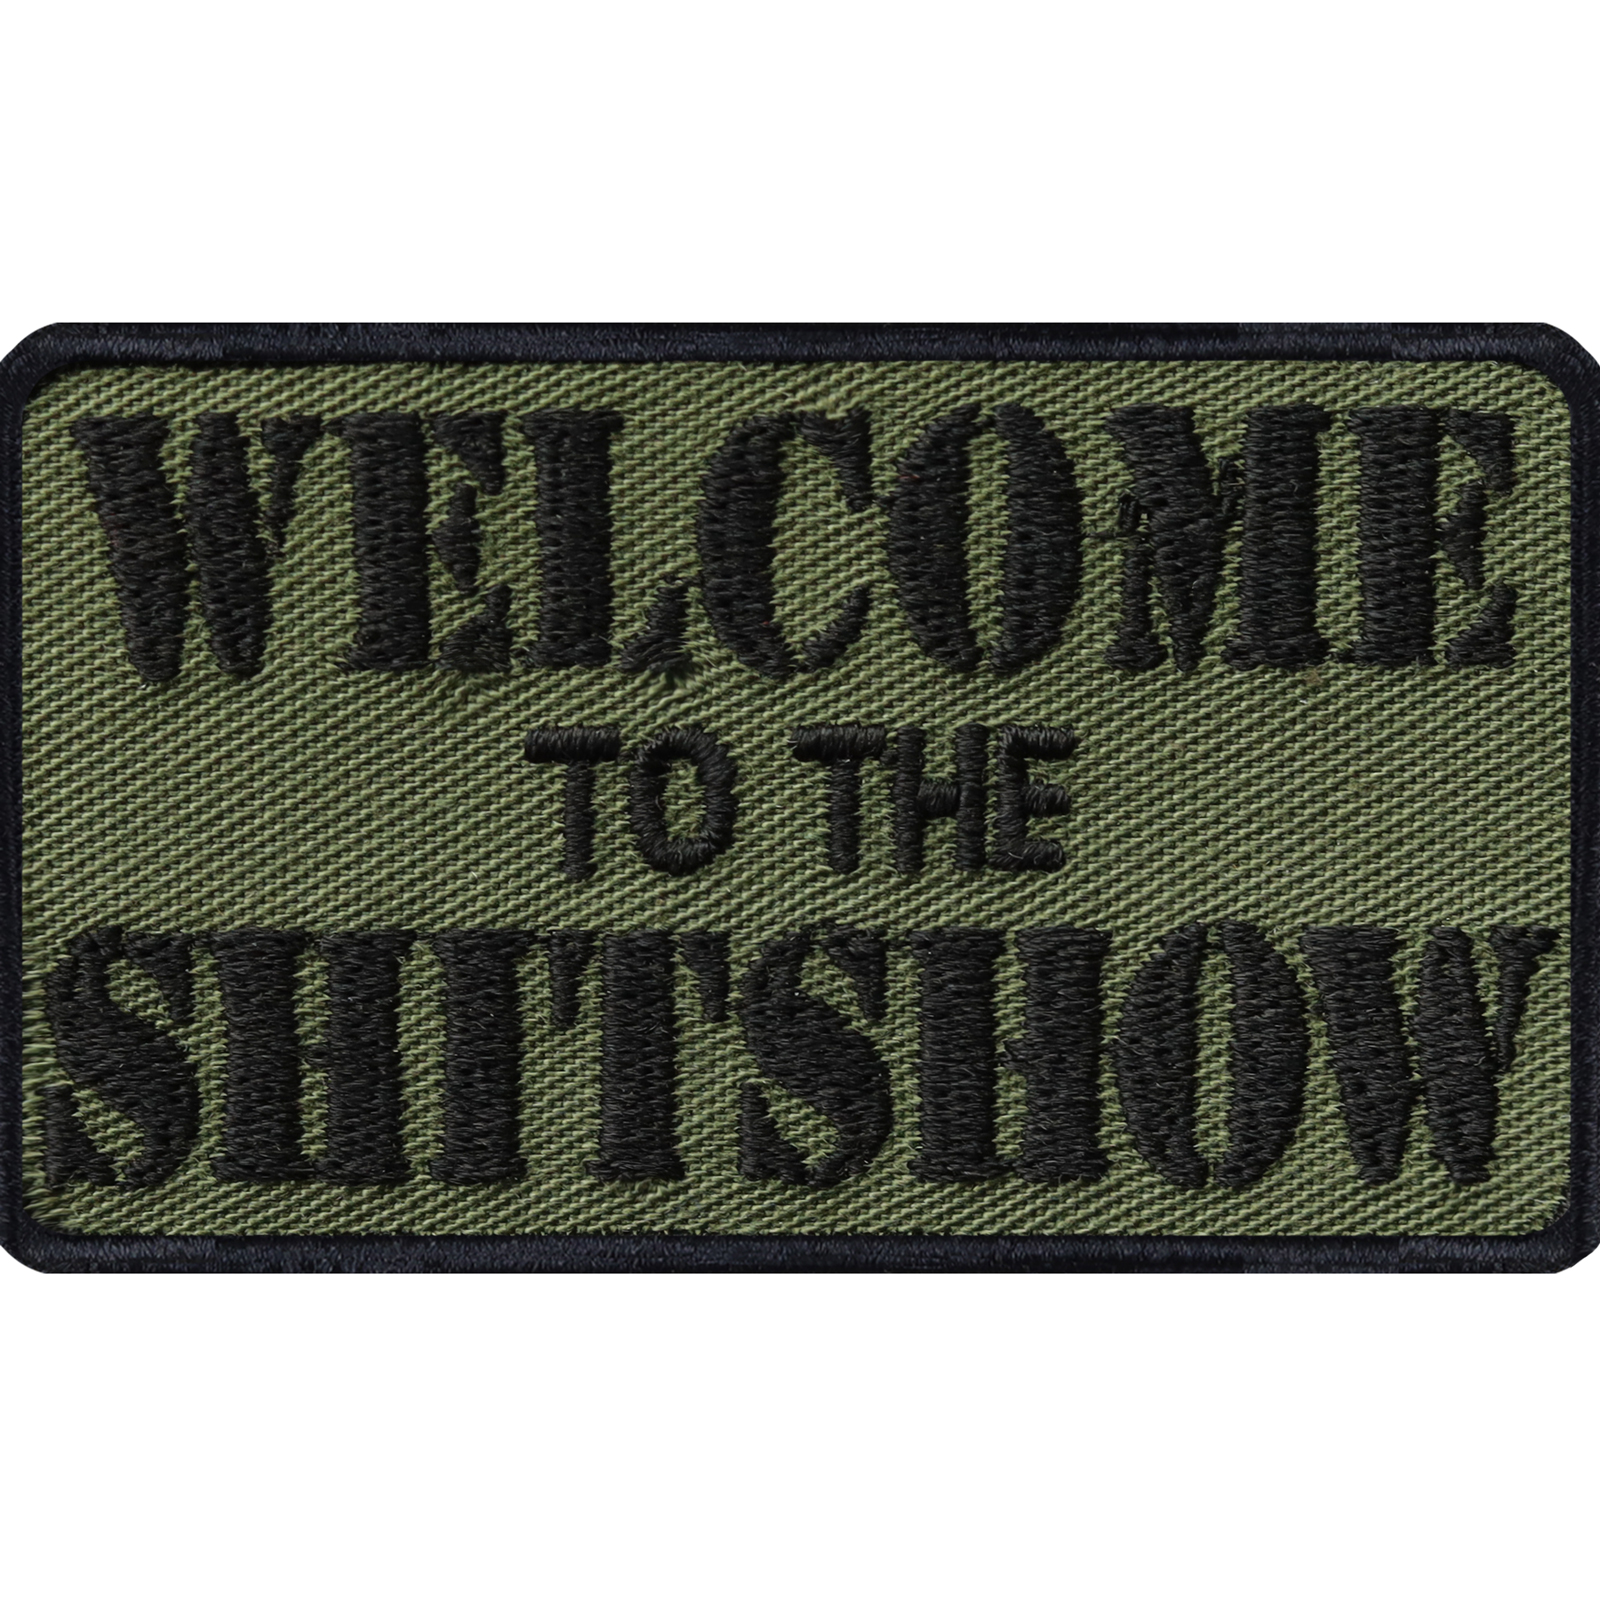 Welcome to the shitshow - Patch